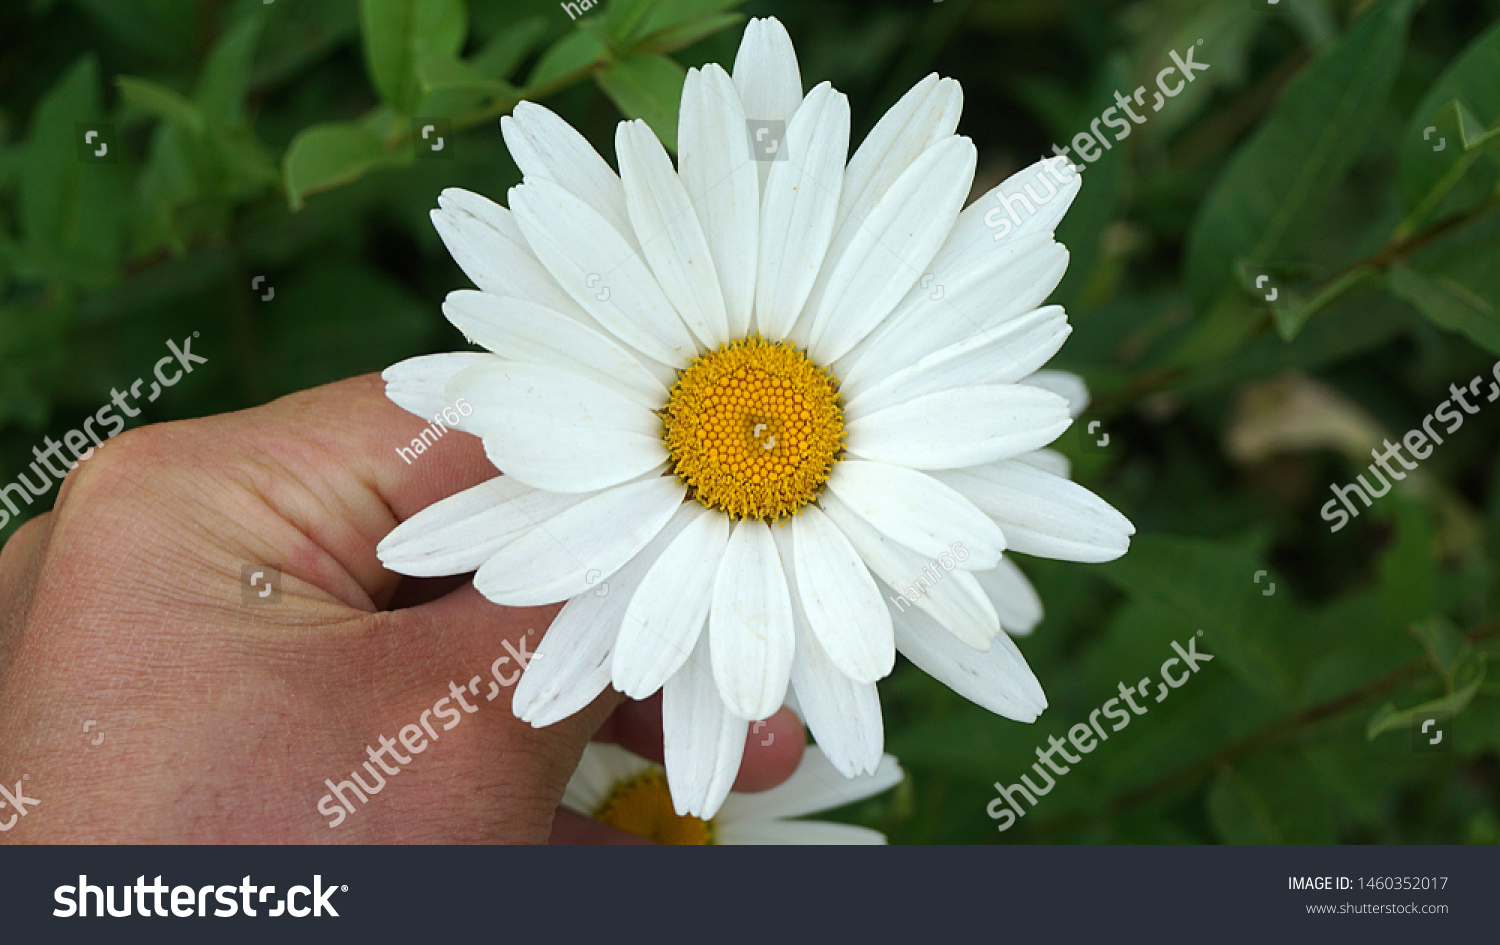   large ornamental daisies, ornamental daisies in the garden, very large,                              #1460352017